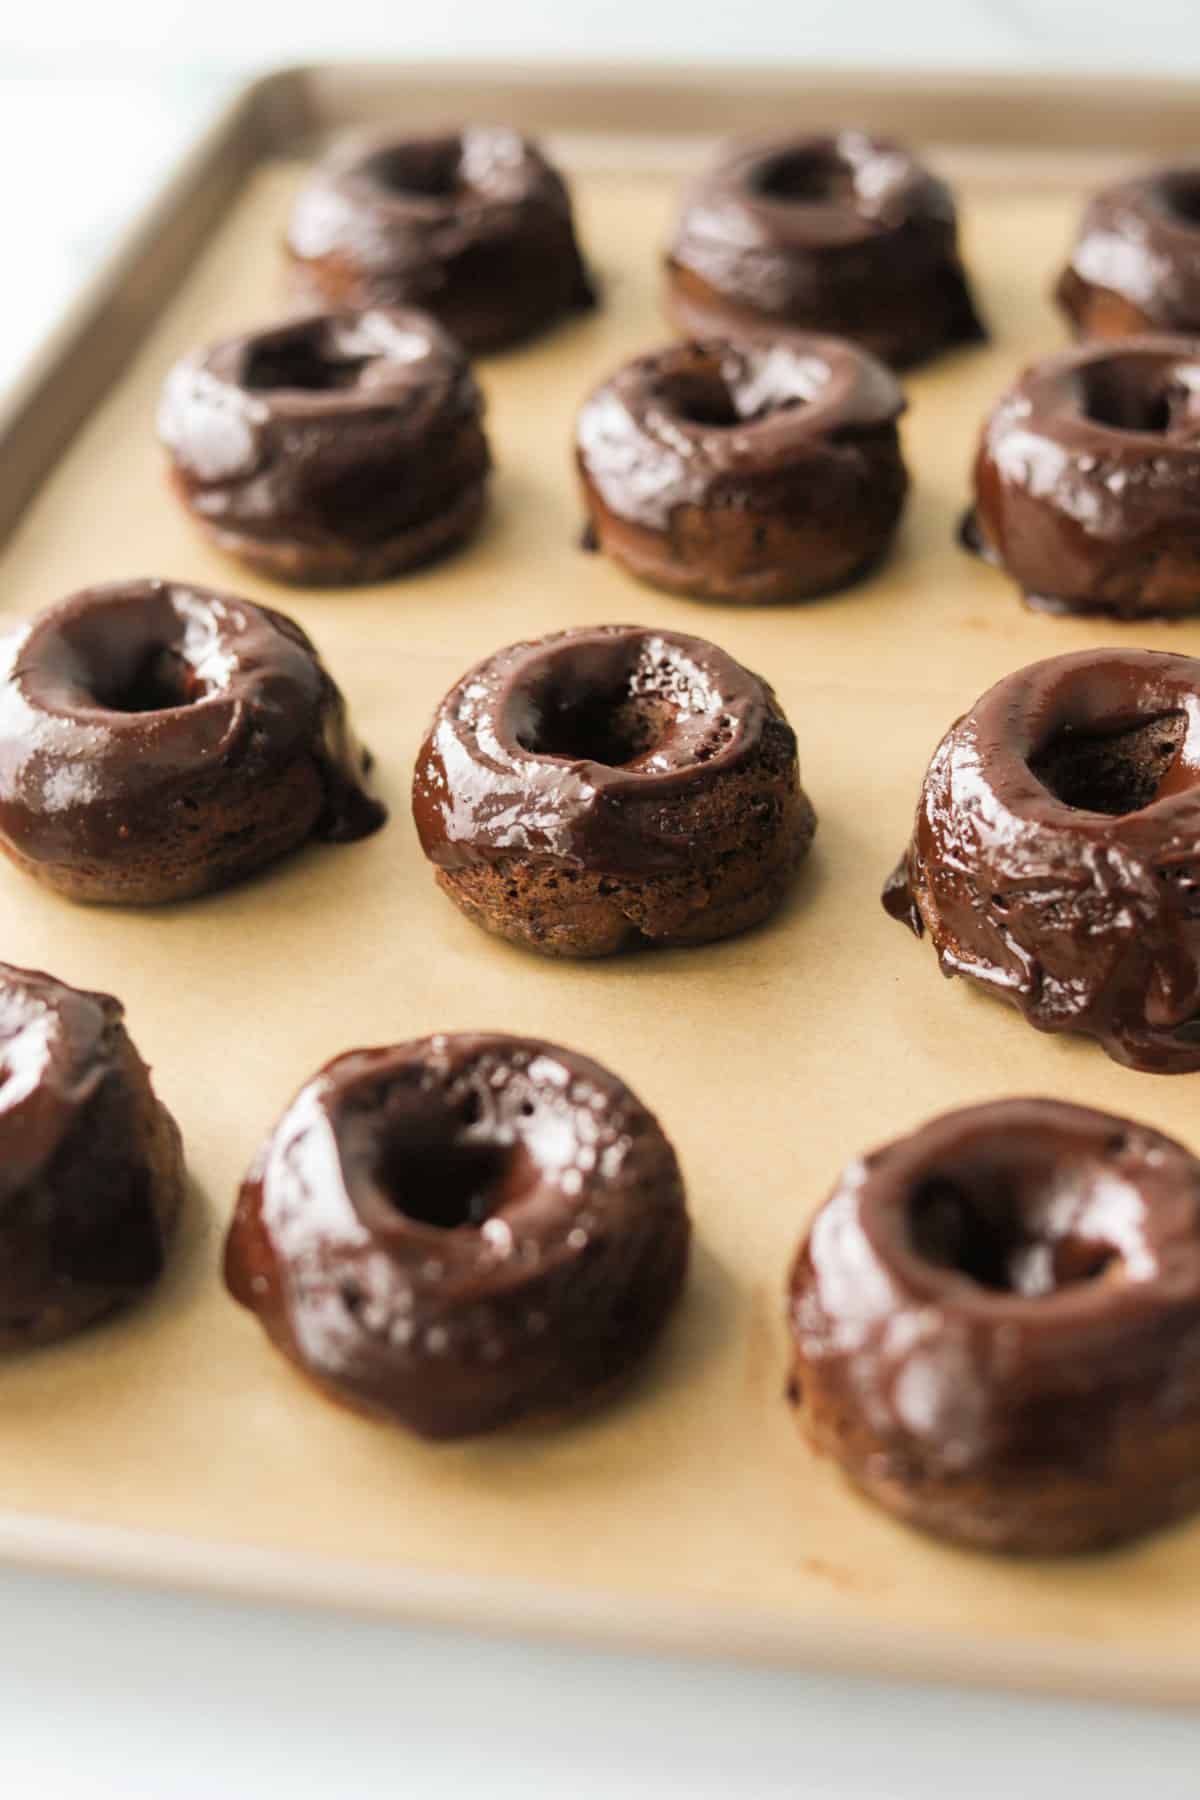 A side angle shot of chocolate donuts lined on a baking sheet.